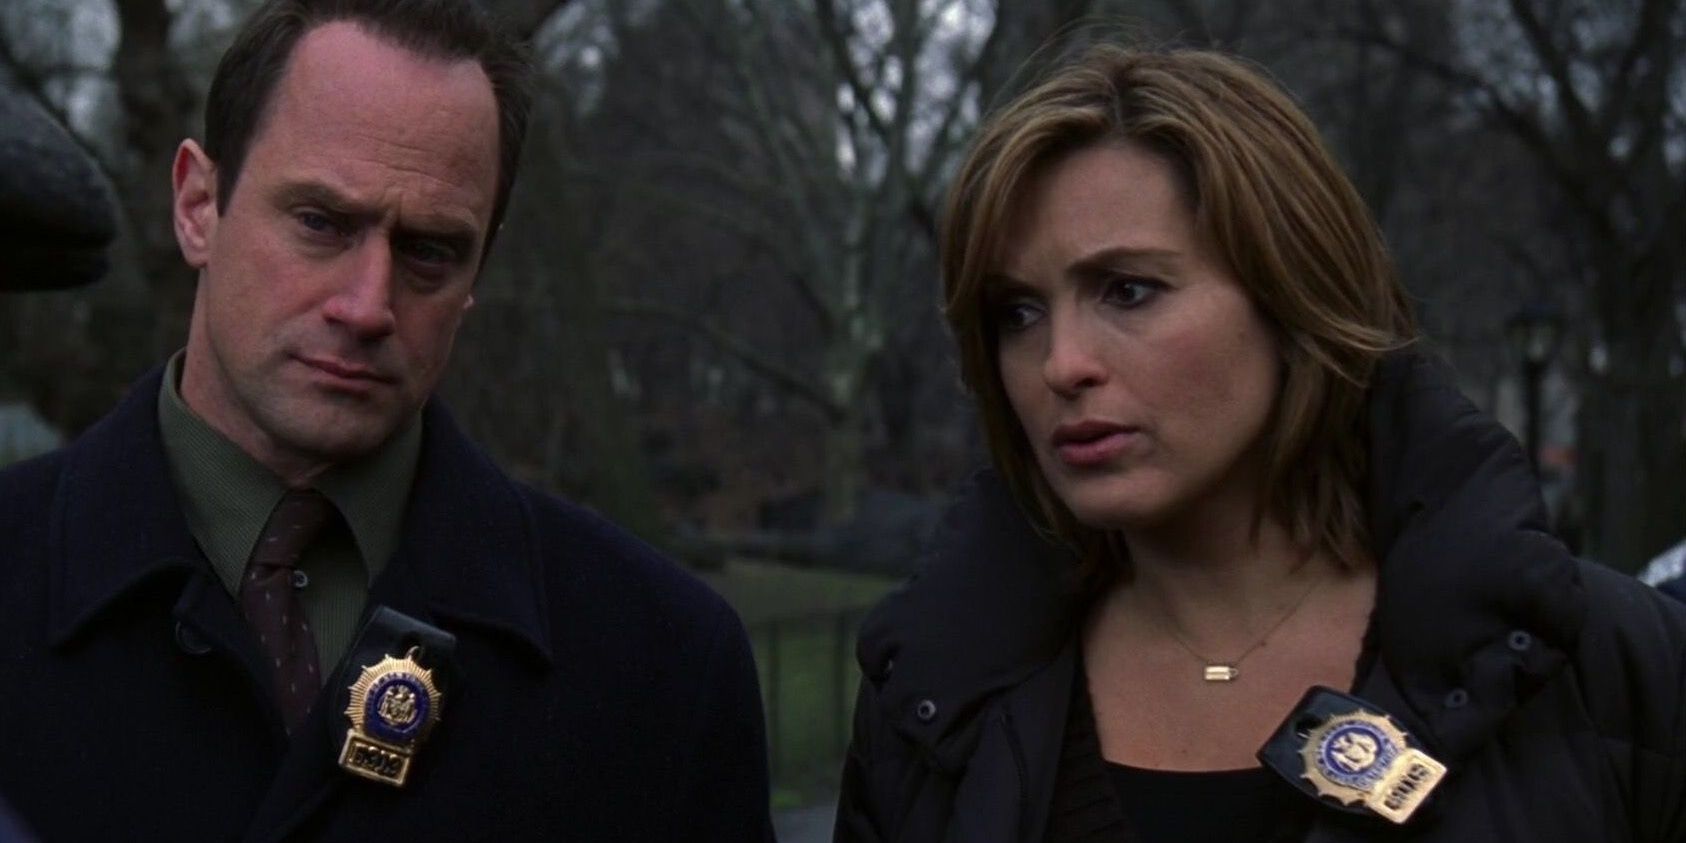 Law & Order SVU: One Quote From Each Main Character That Goes Against Their Personality